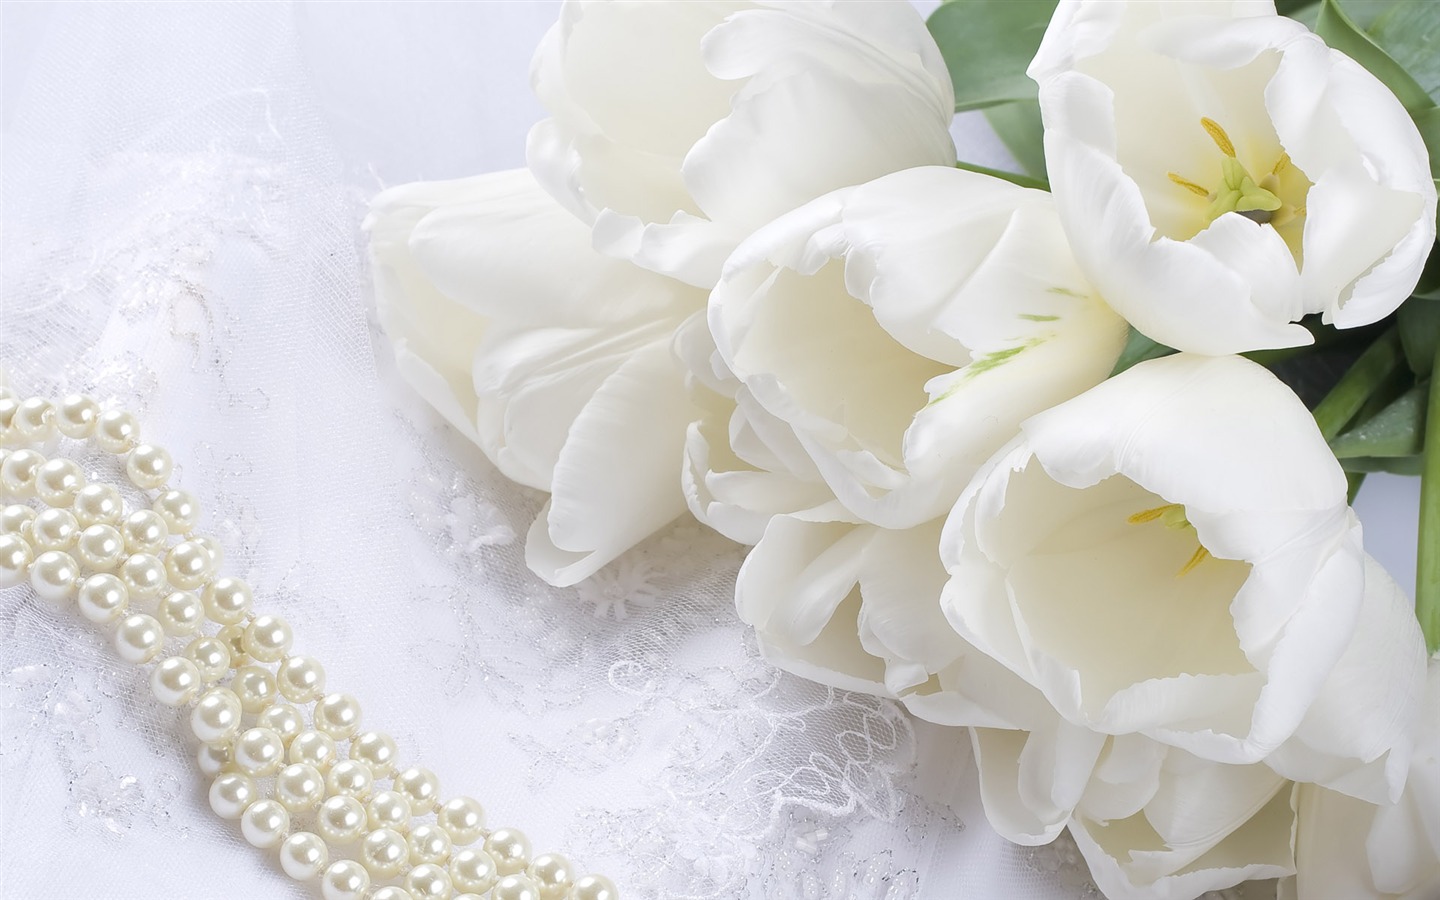 Weddings and Flowers wallpaper (1) #3 - 1440x900